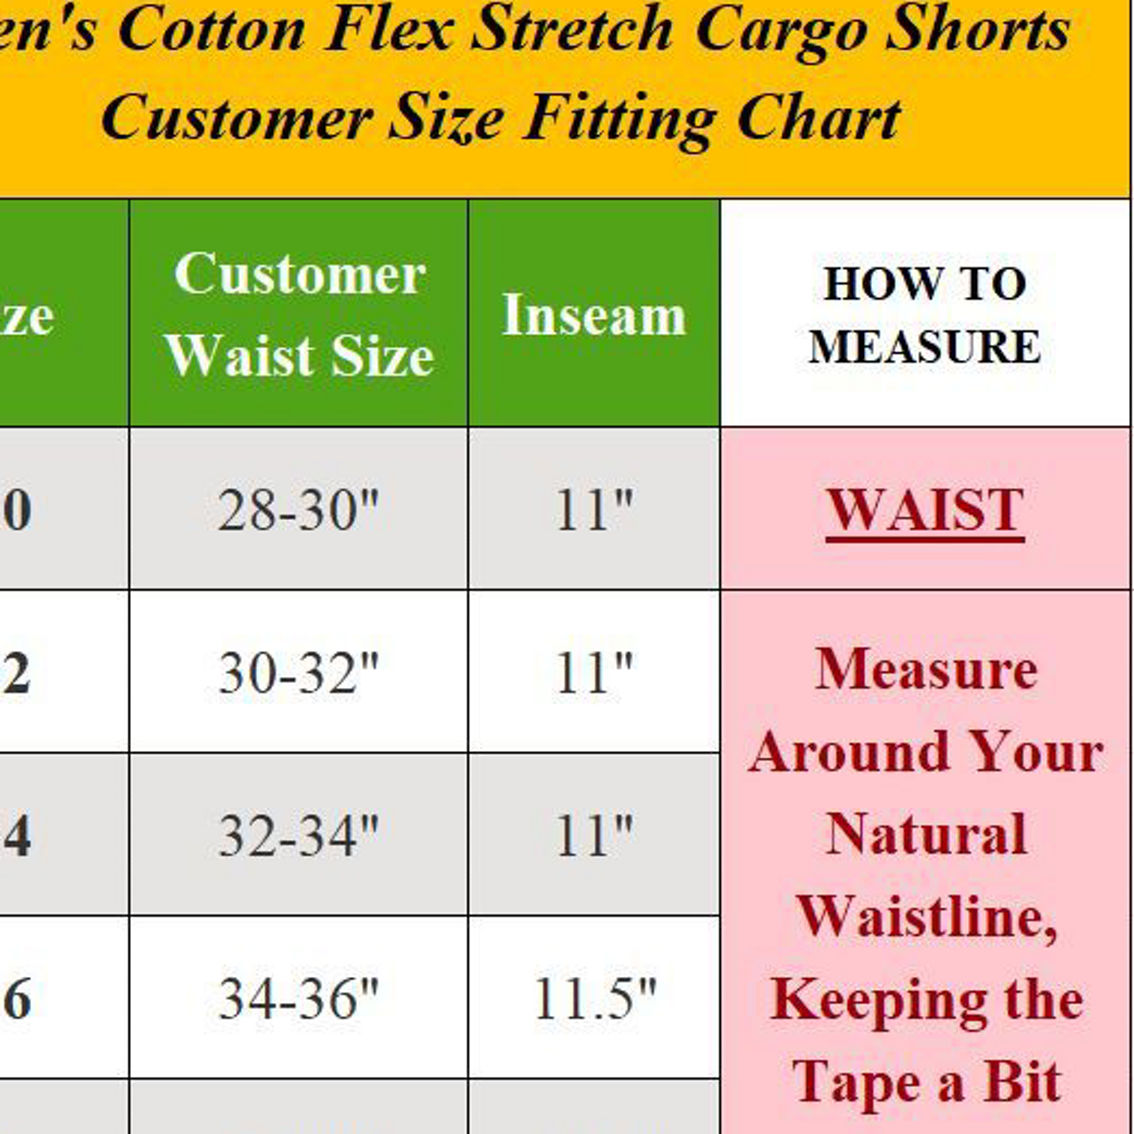 Mens Flat Front Belted Cotton Cargo Shorts - Image 2 of 2